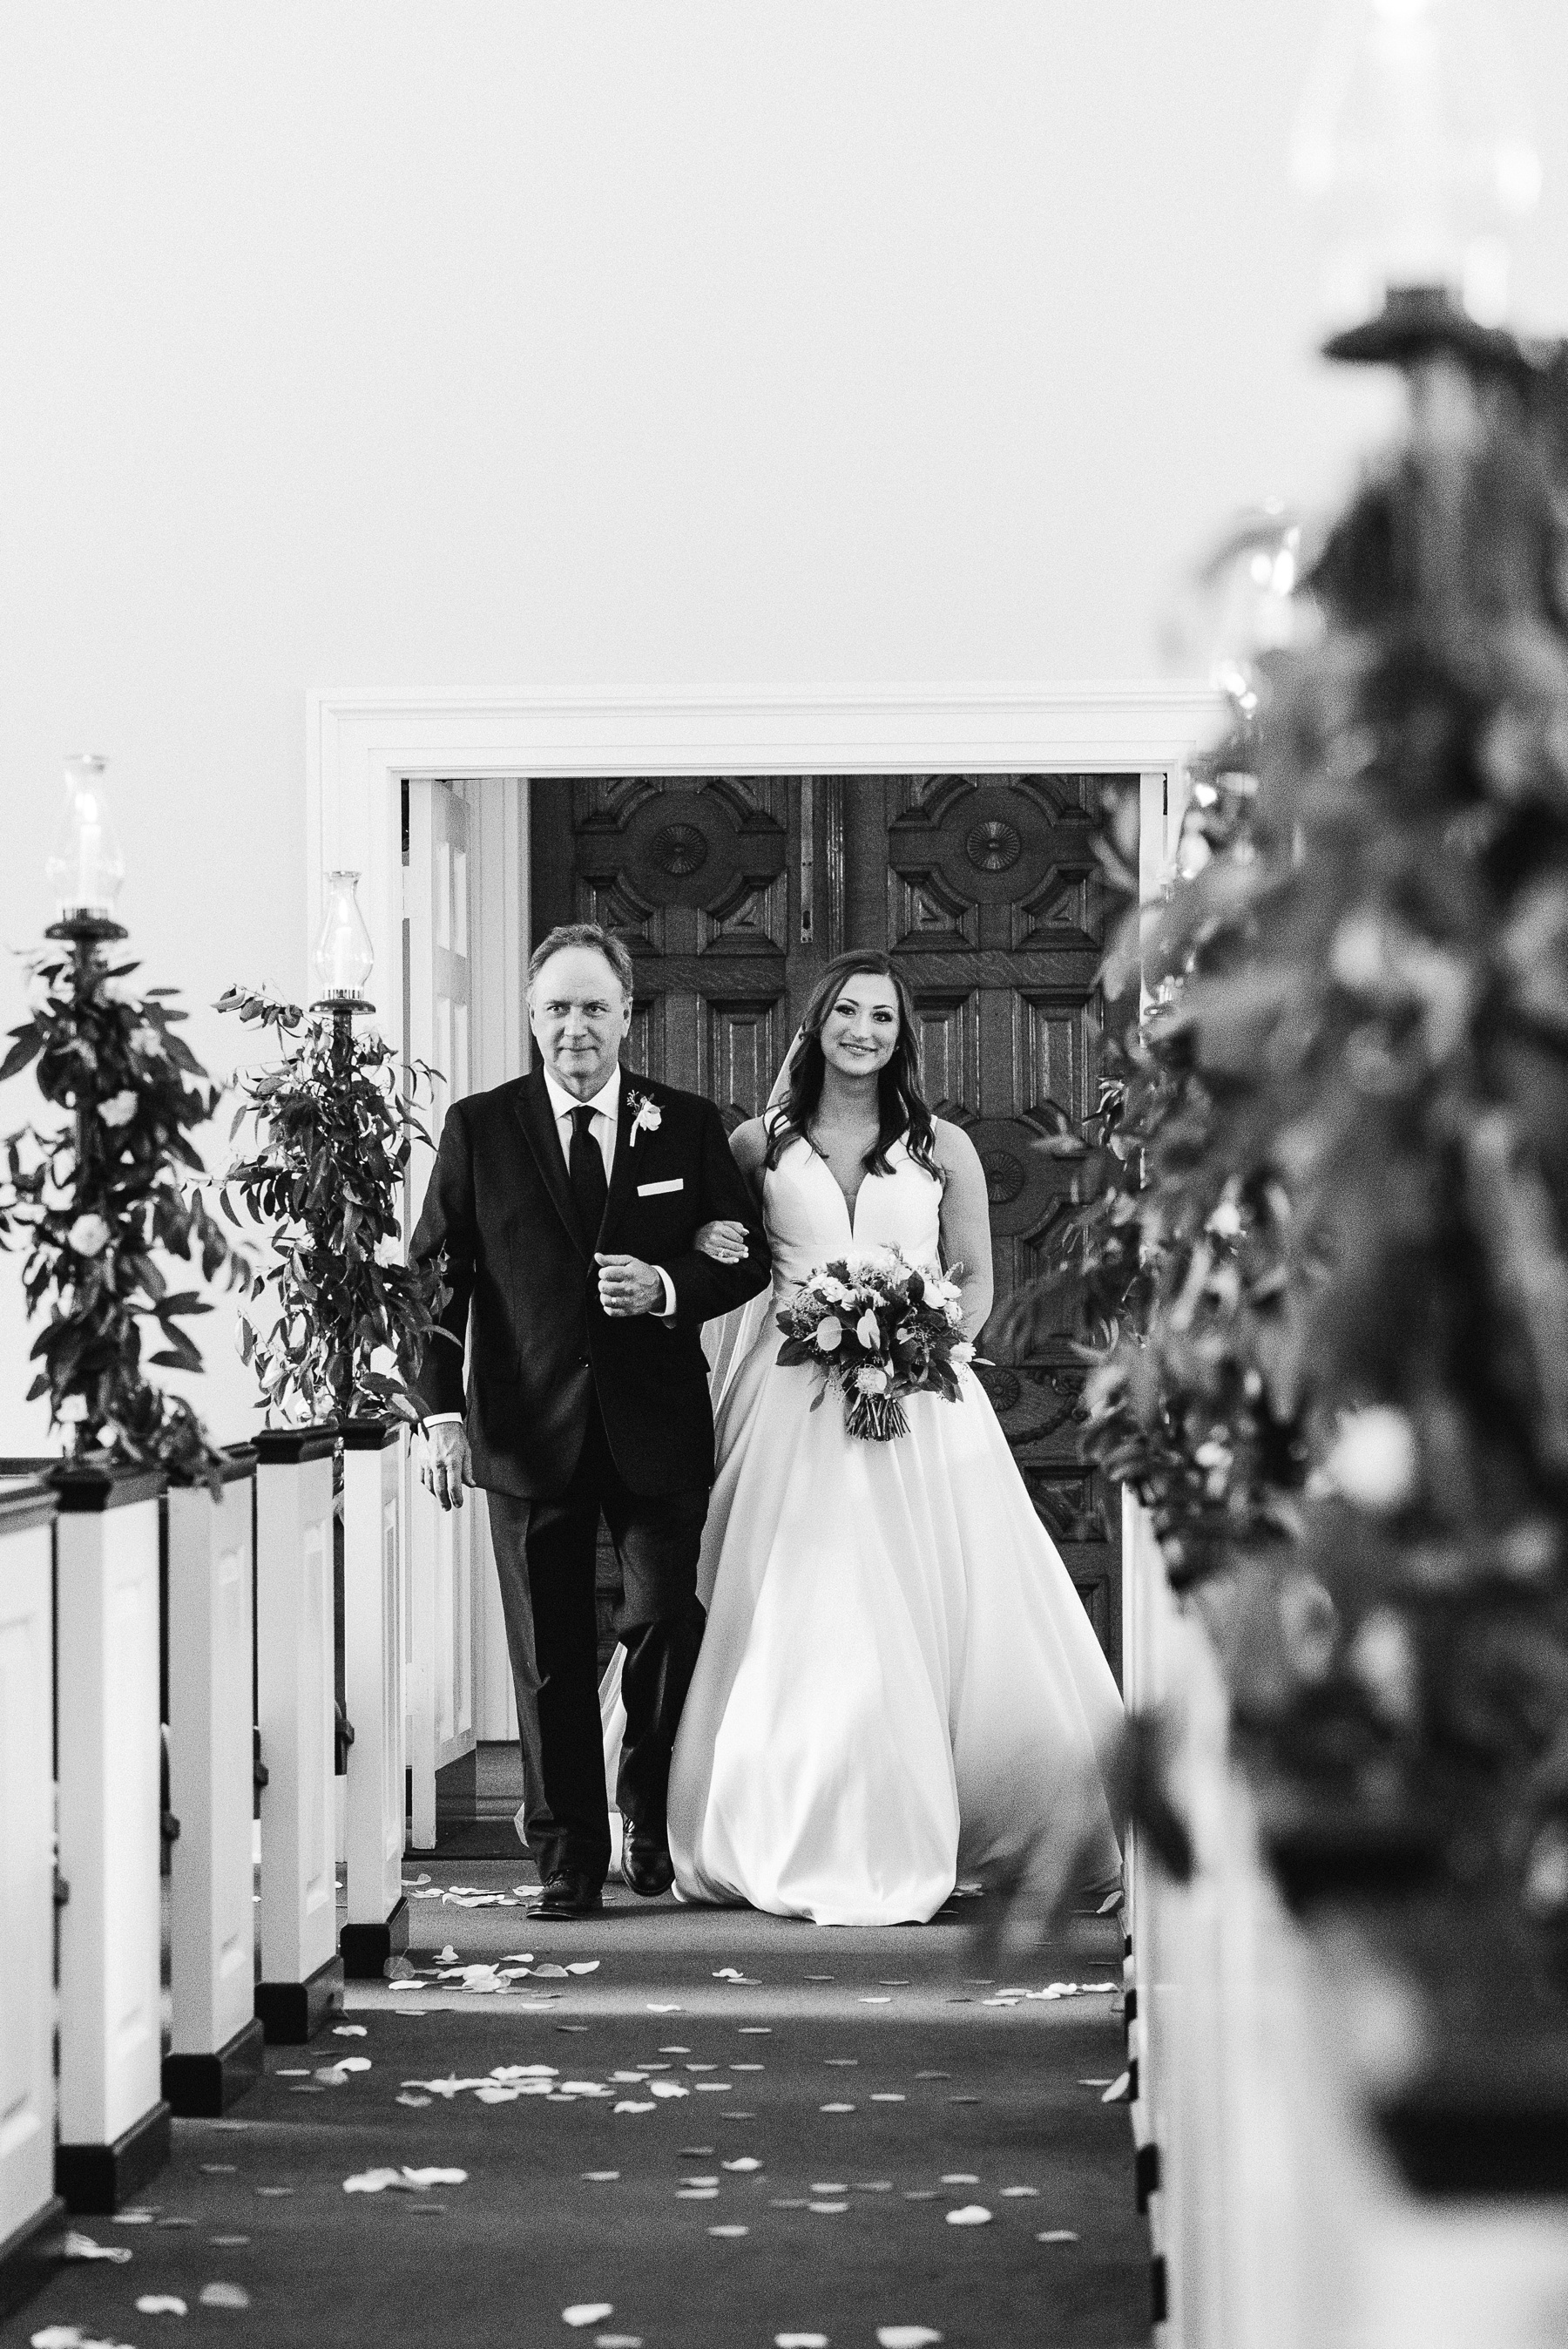 Dad and Bride Walking Down the Aisle